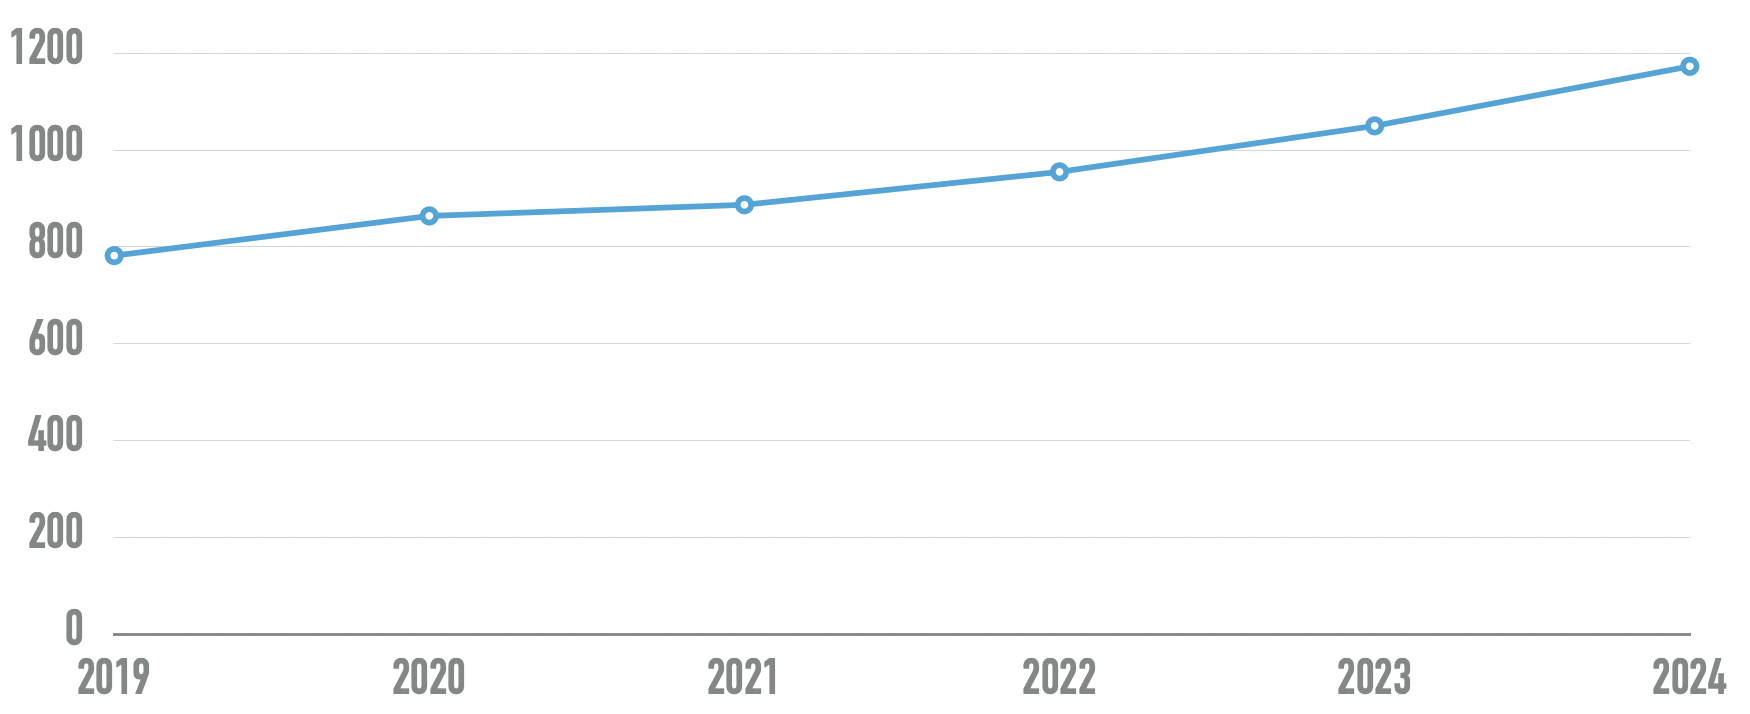 Line chart showing number of home page elements steadily increasing from 782 in 2019 to 1173 in 2023.